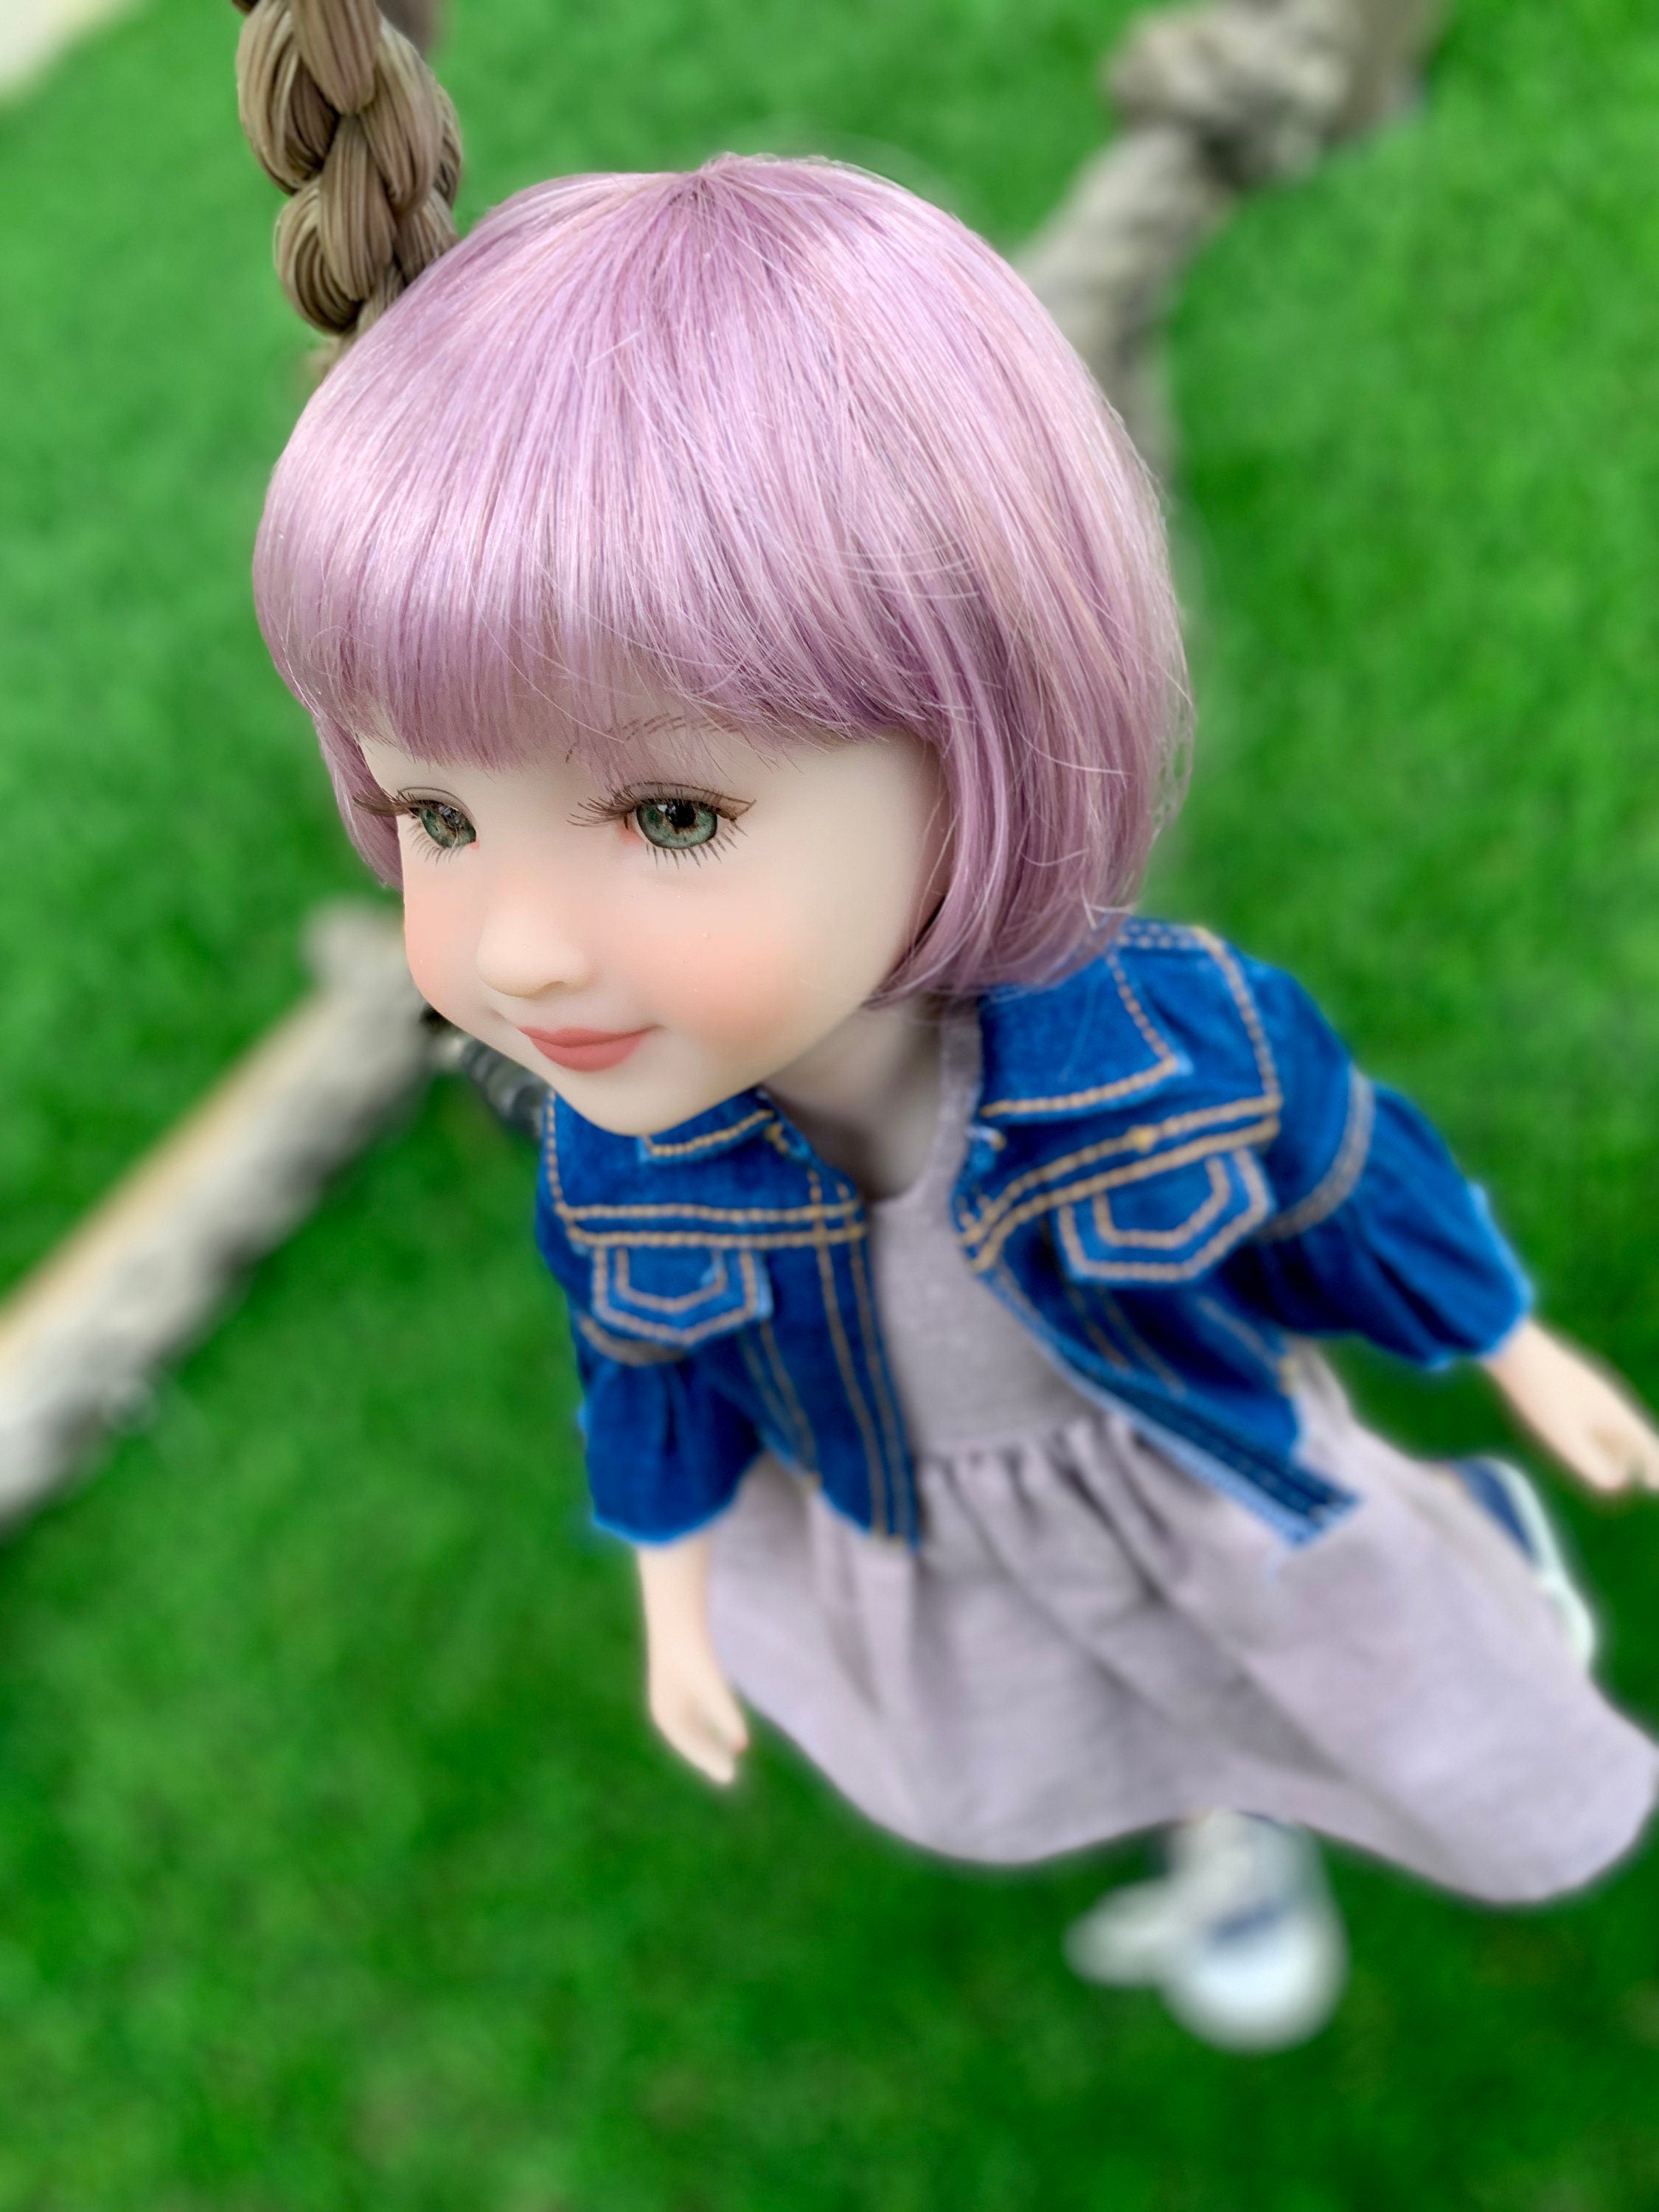 Custom doll WIG Exclusive Vegan Mohair-fits 9-10" head size Kaye Wiggs, RRFF, wellie wishers, bjd, Girl for All Time"Loose Fit"